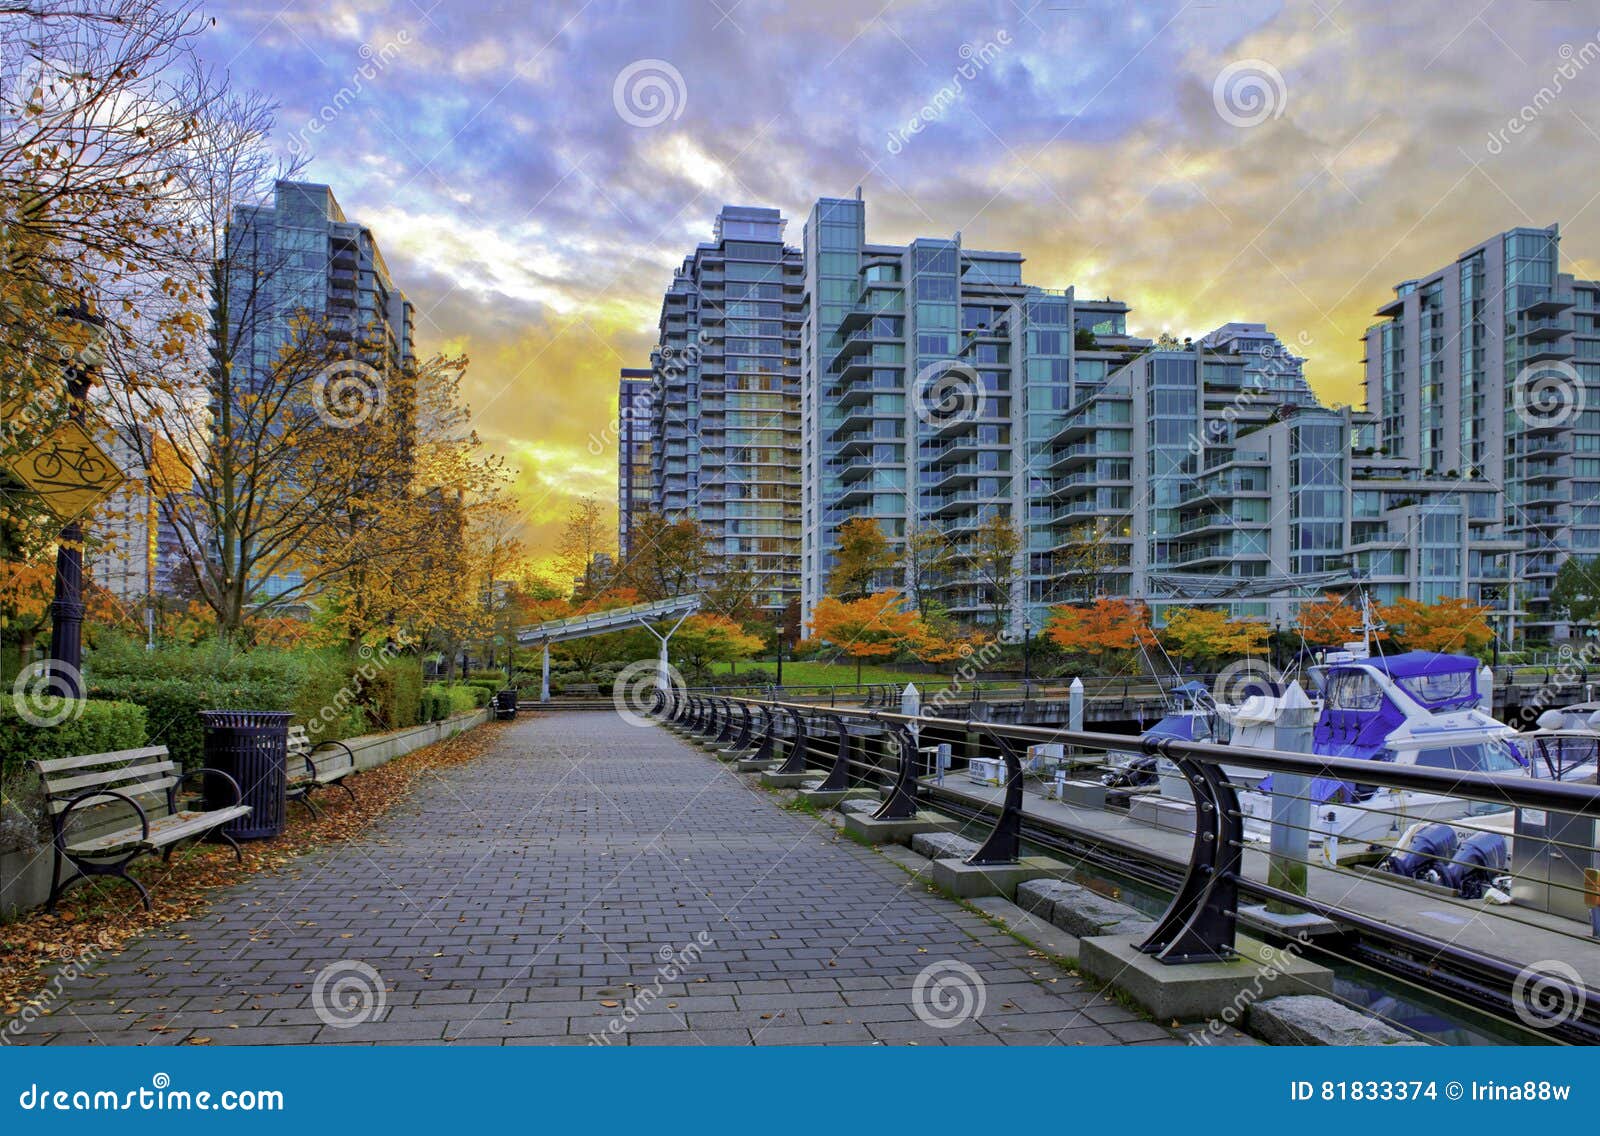 paved pathway along coal harbour in vancouver, canada.